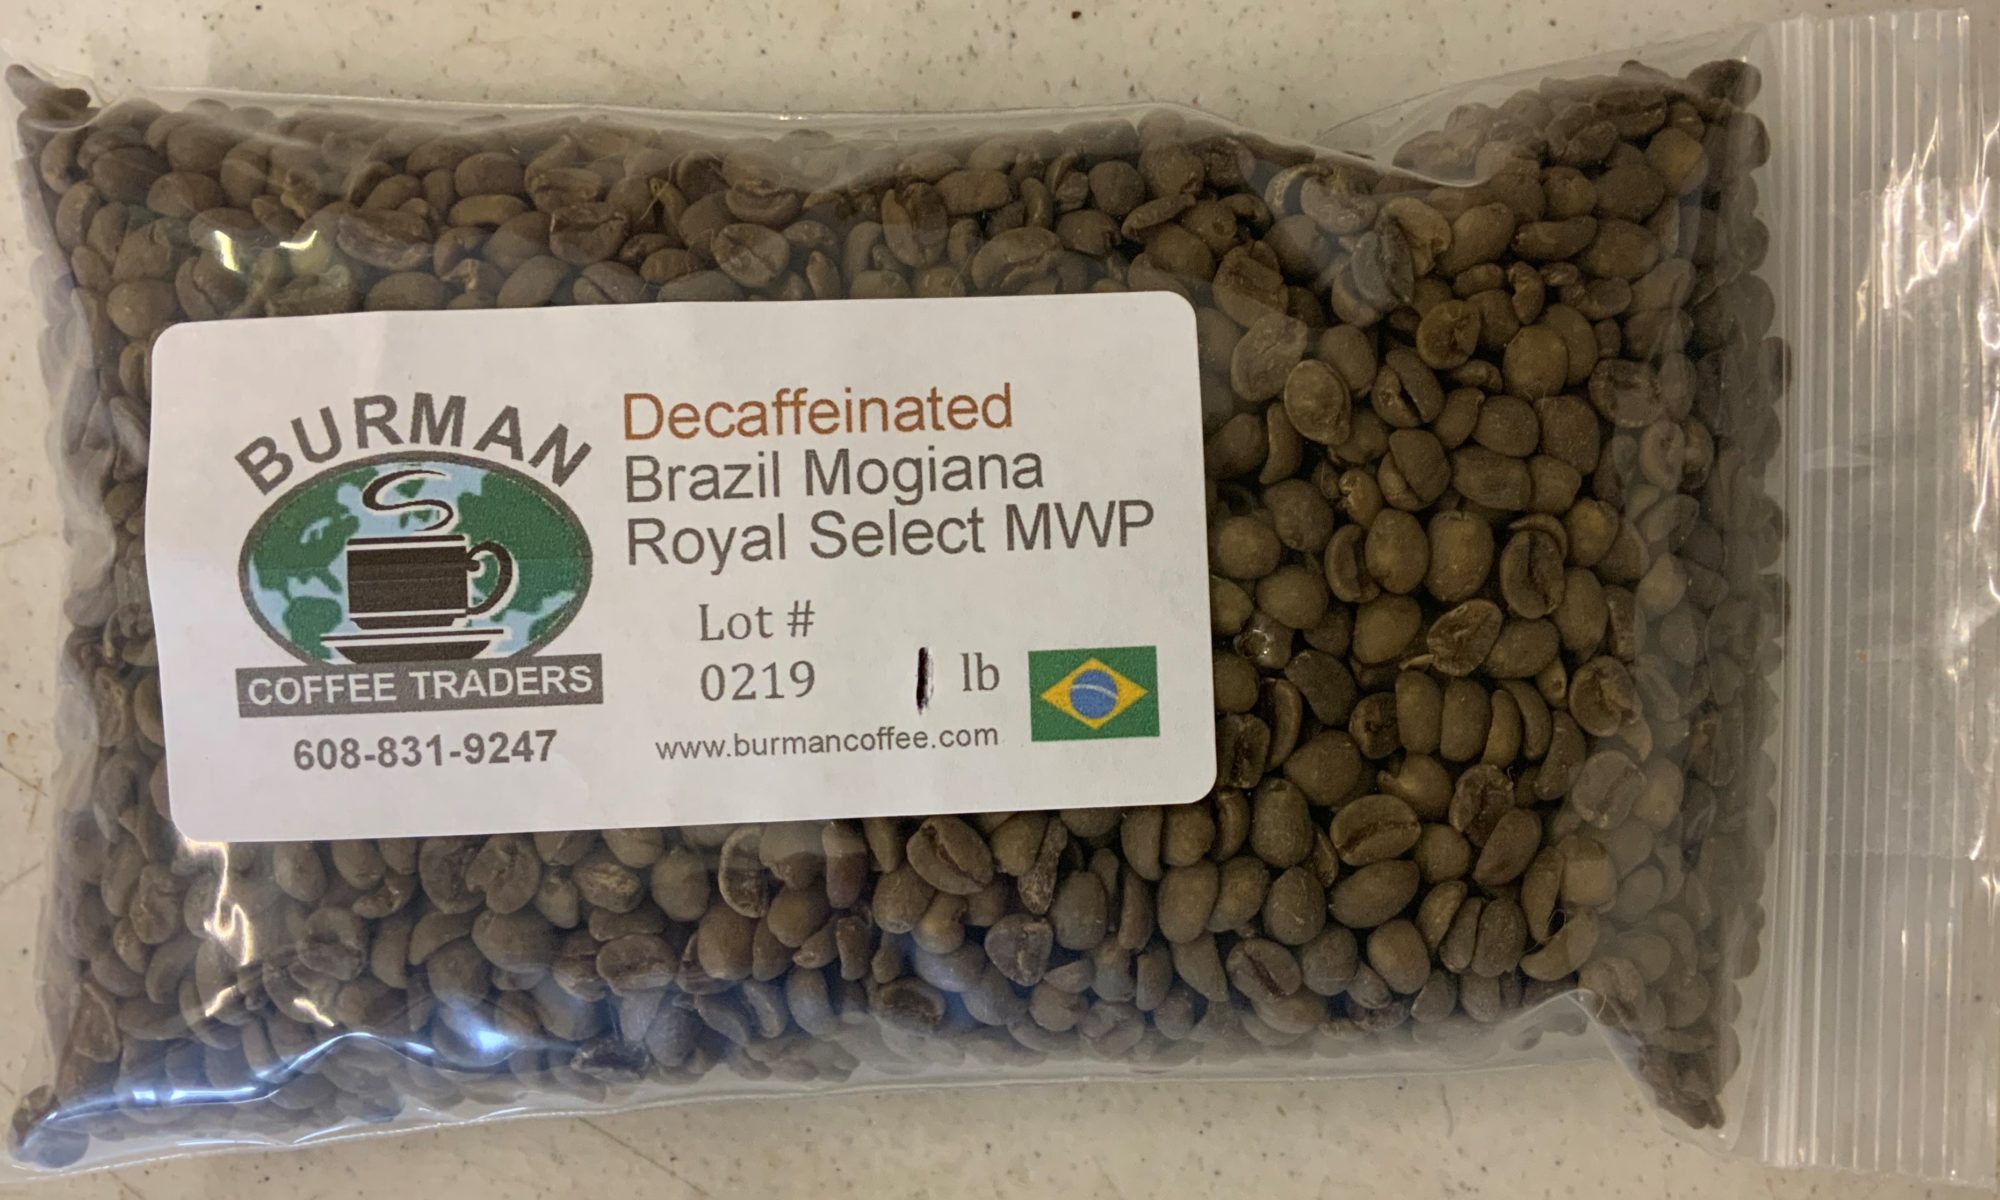 unroasted coffee beans decaf brazil mogiana swp